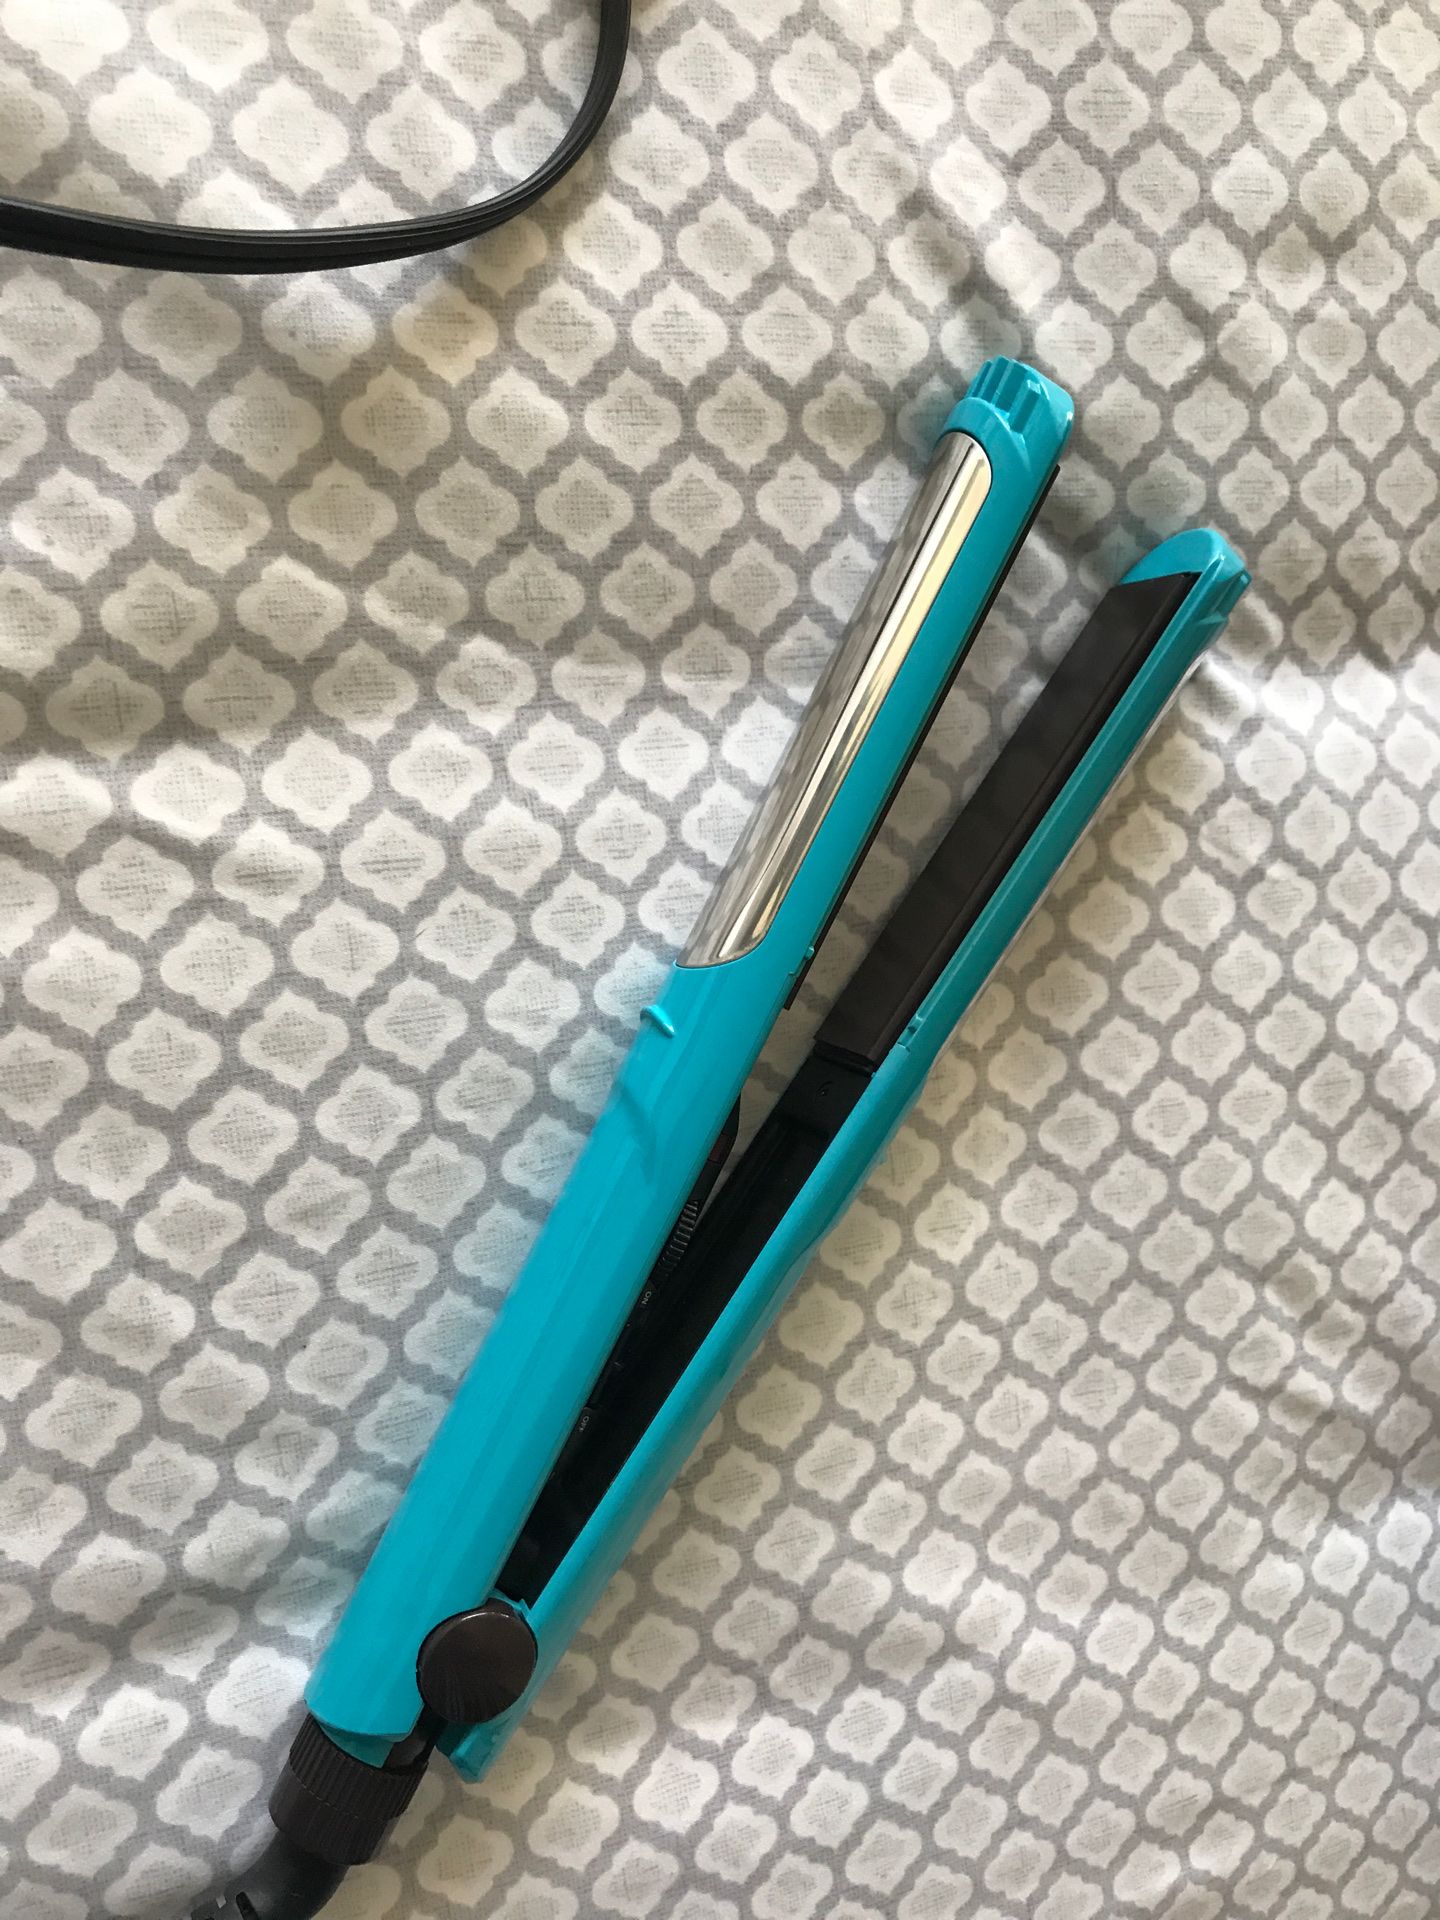 Double sided straightener